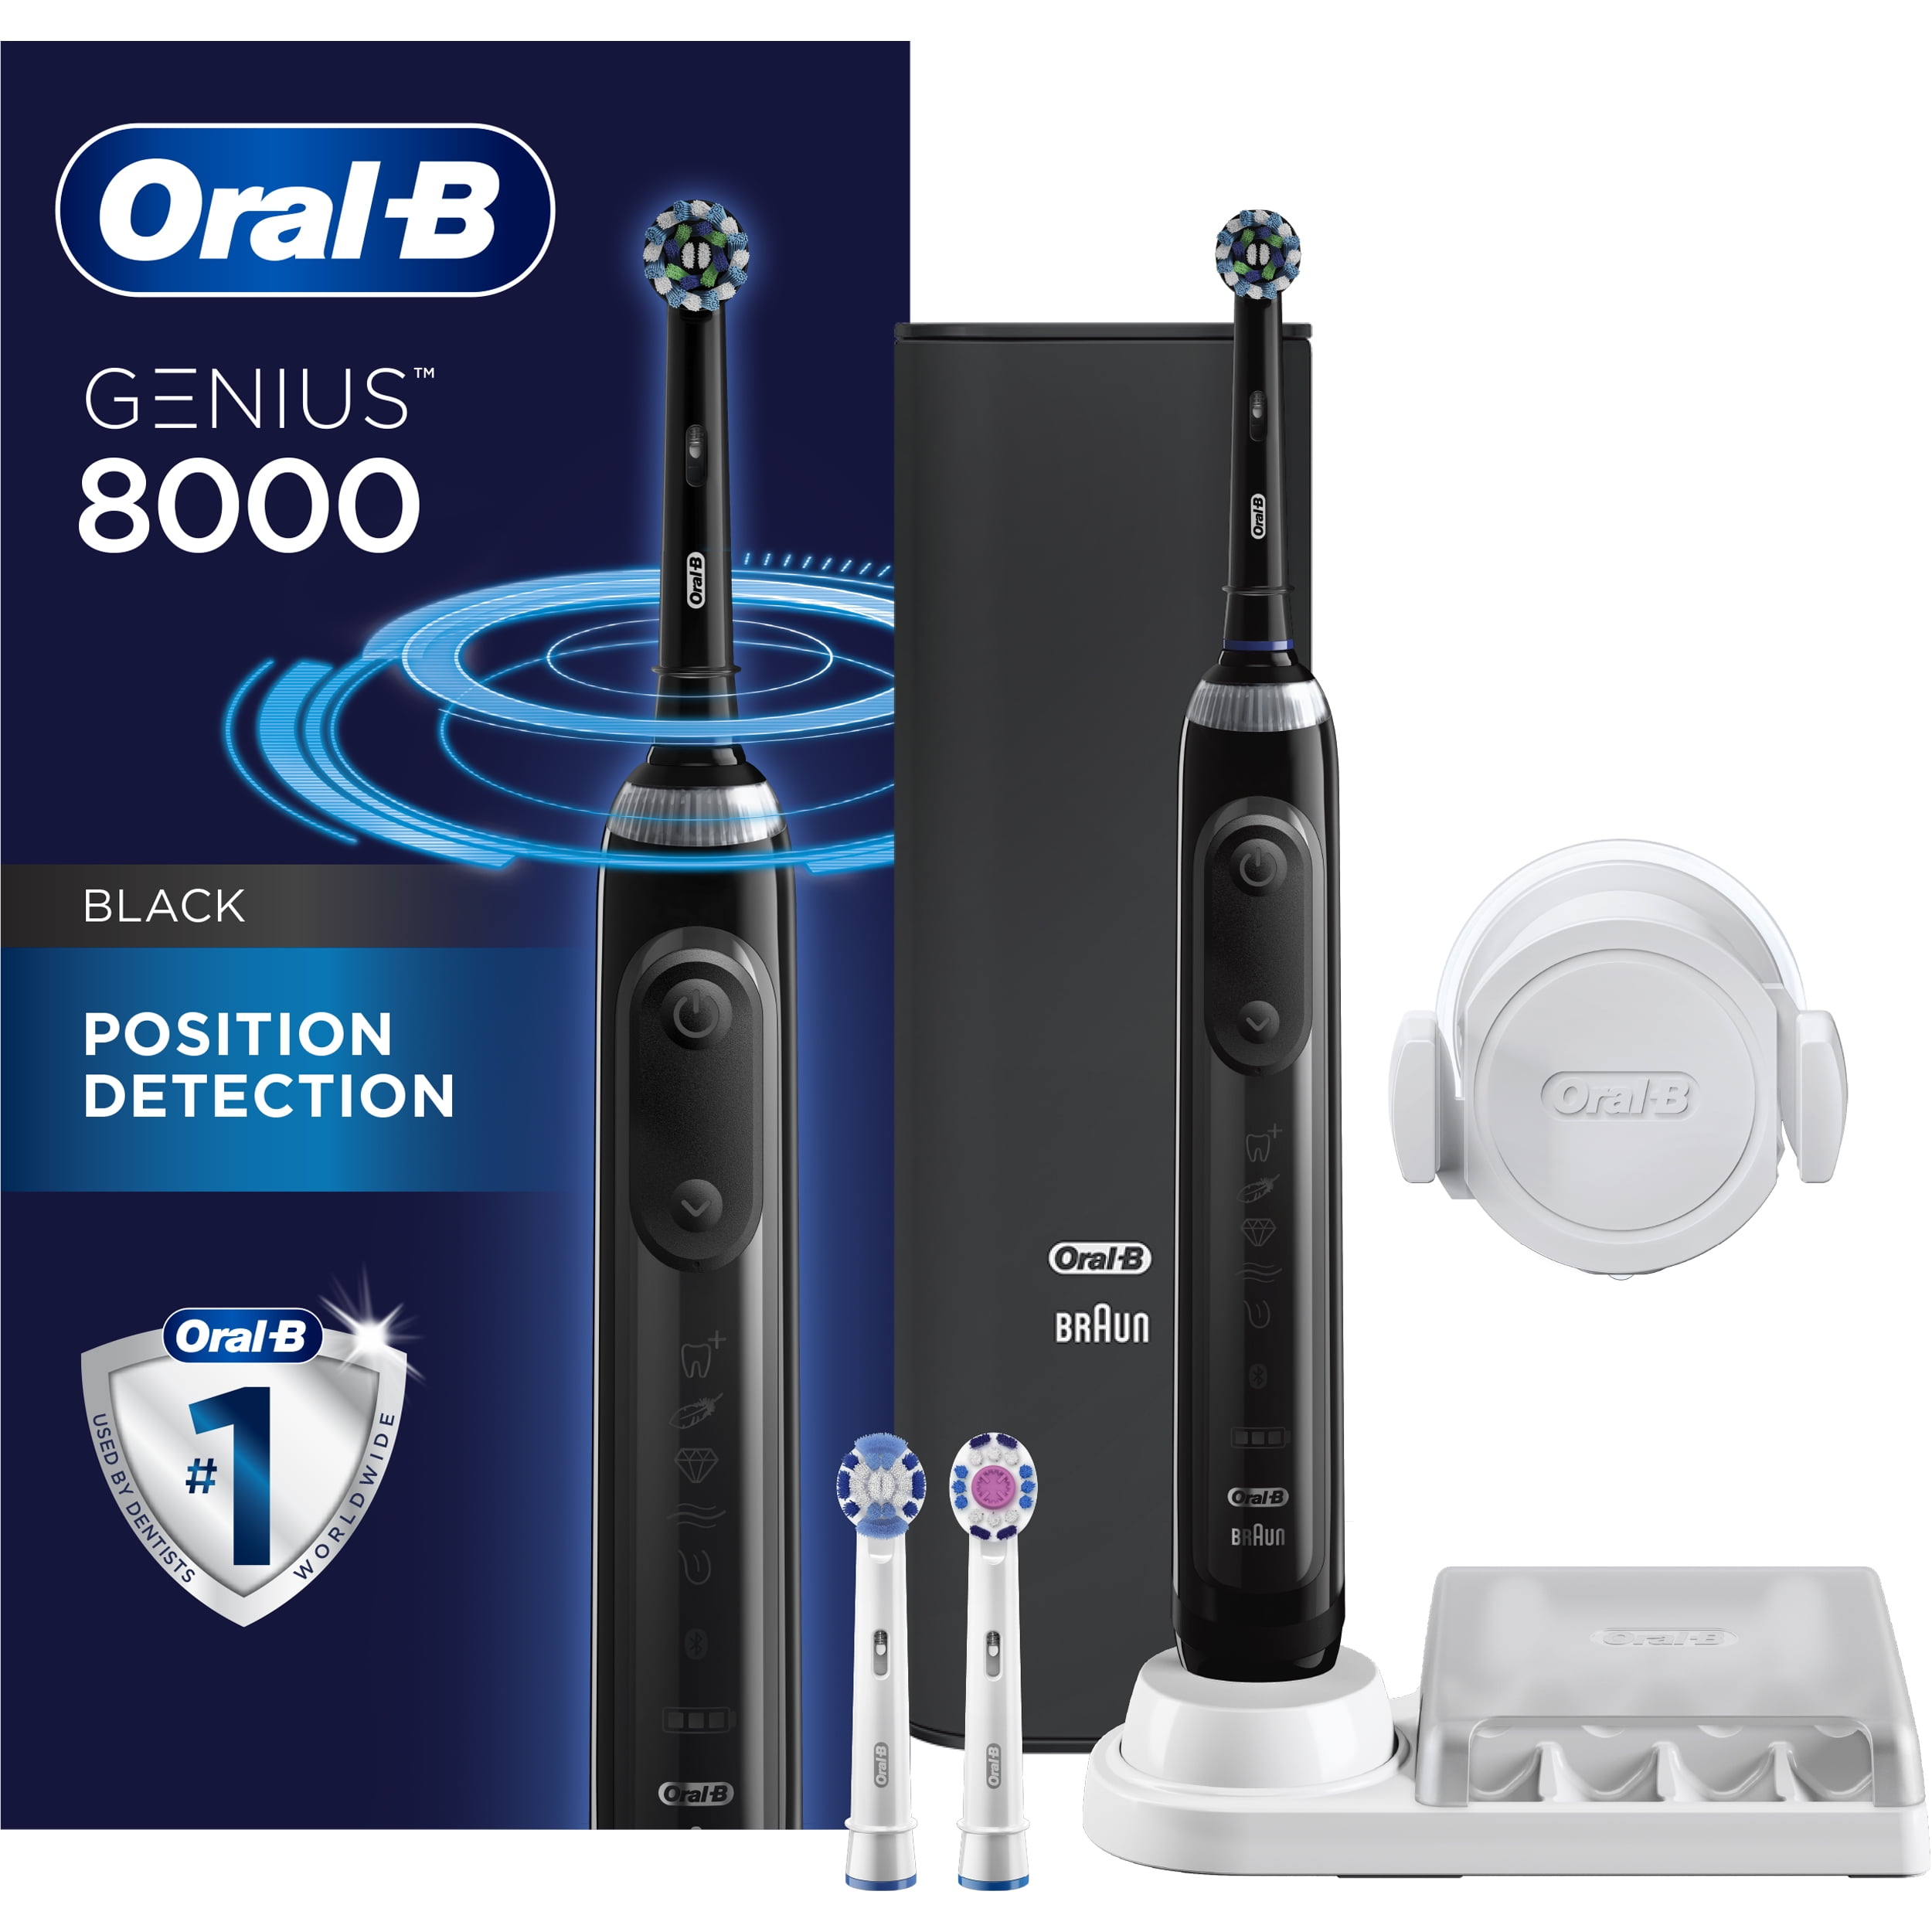 Oral-B Genius 8000 Rechargeable Electric Toothbrush, Black, 1 Ct